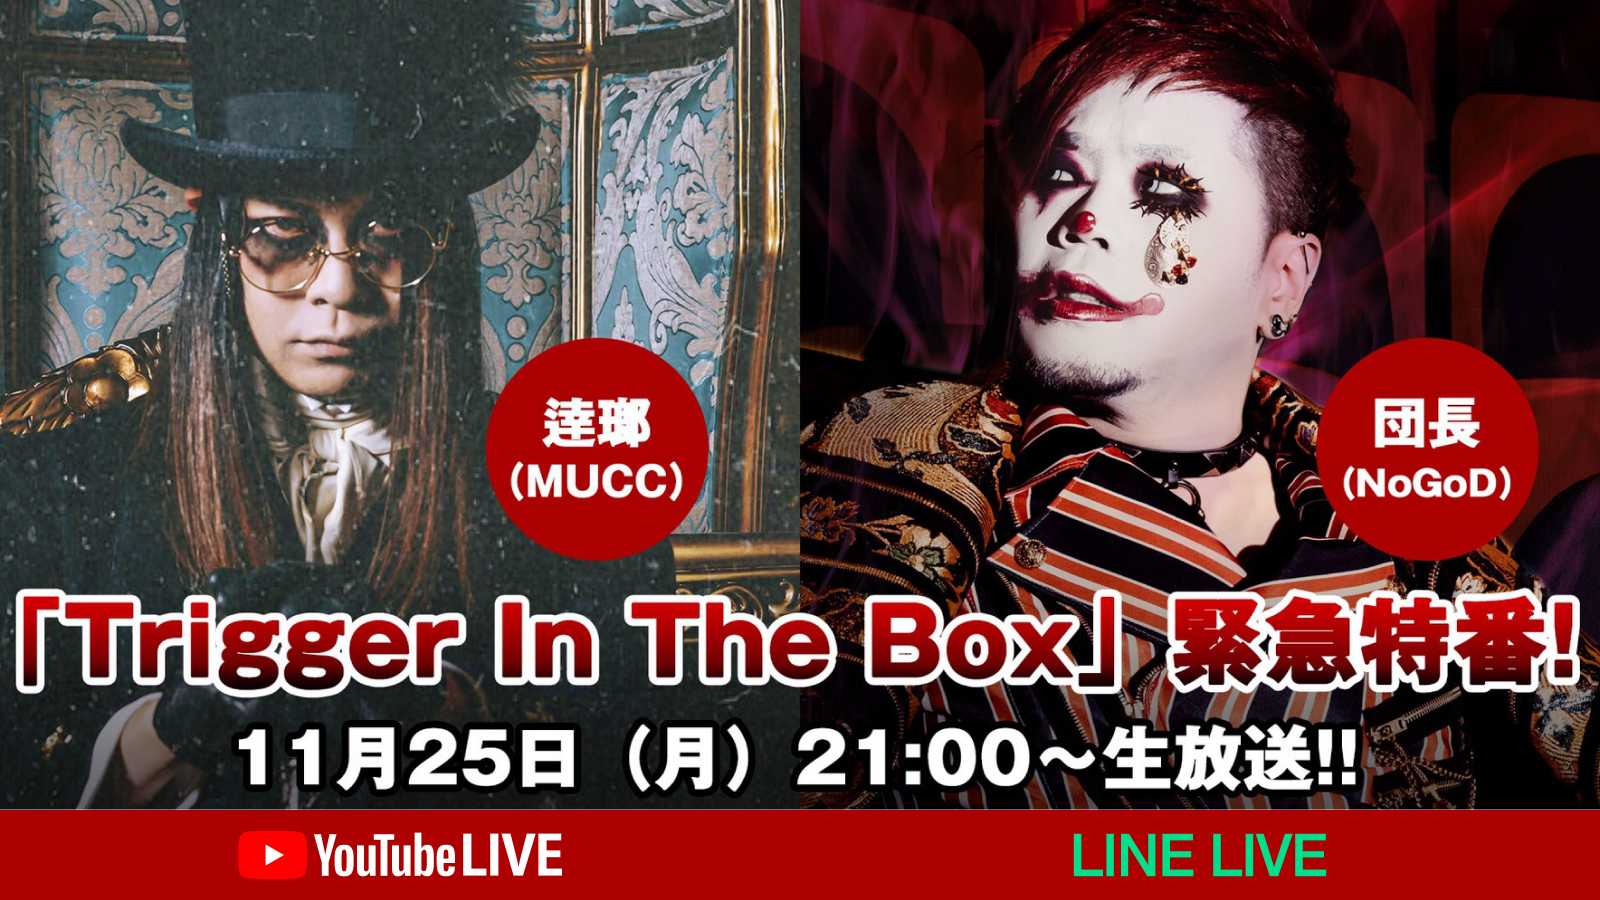 "Trigger In The Box" Special Program to Air on YouTube Live and LINE LIVE © Trigger In The Box. All rights reserved.